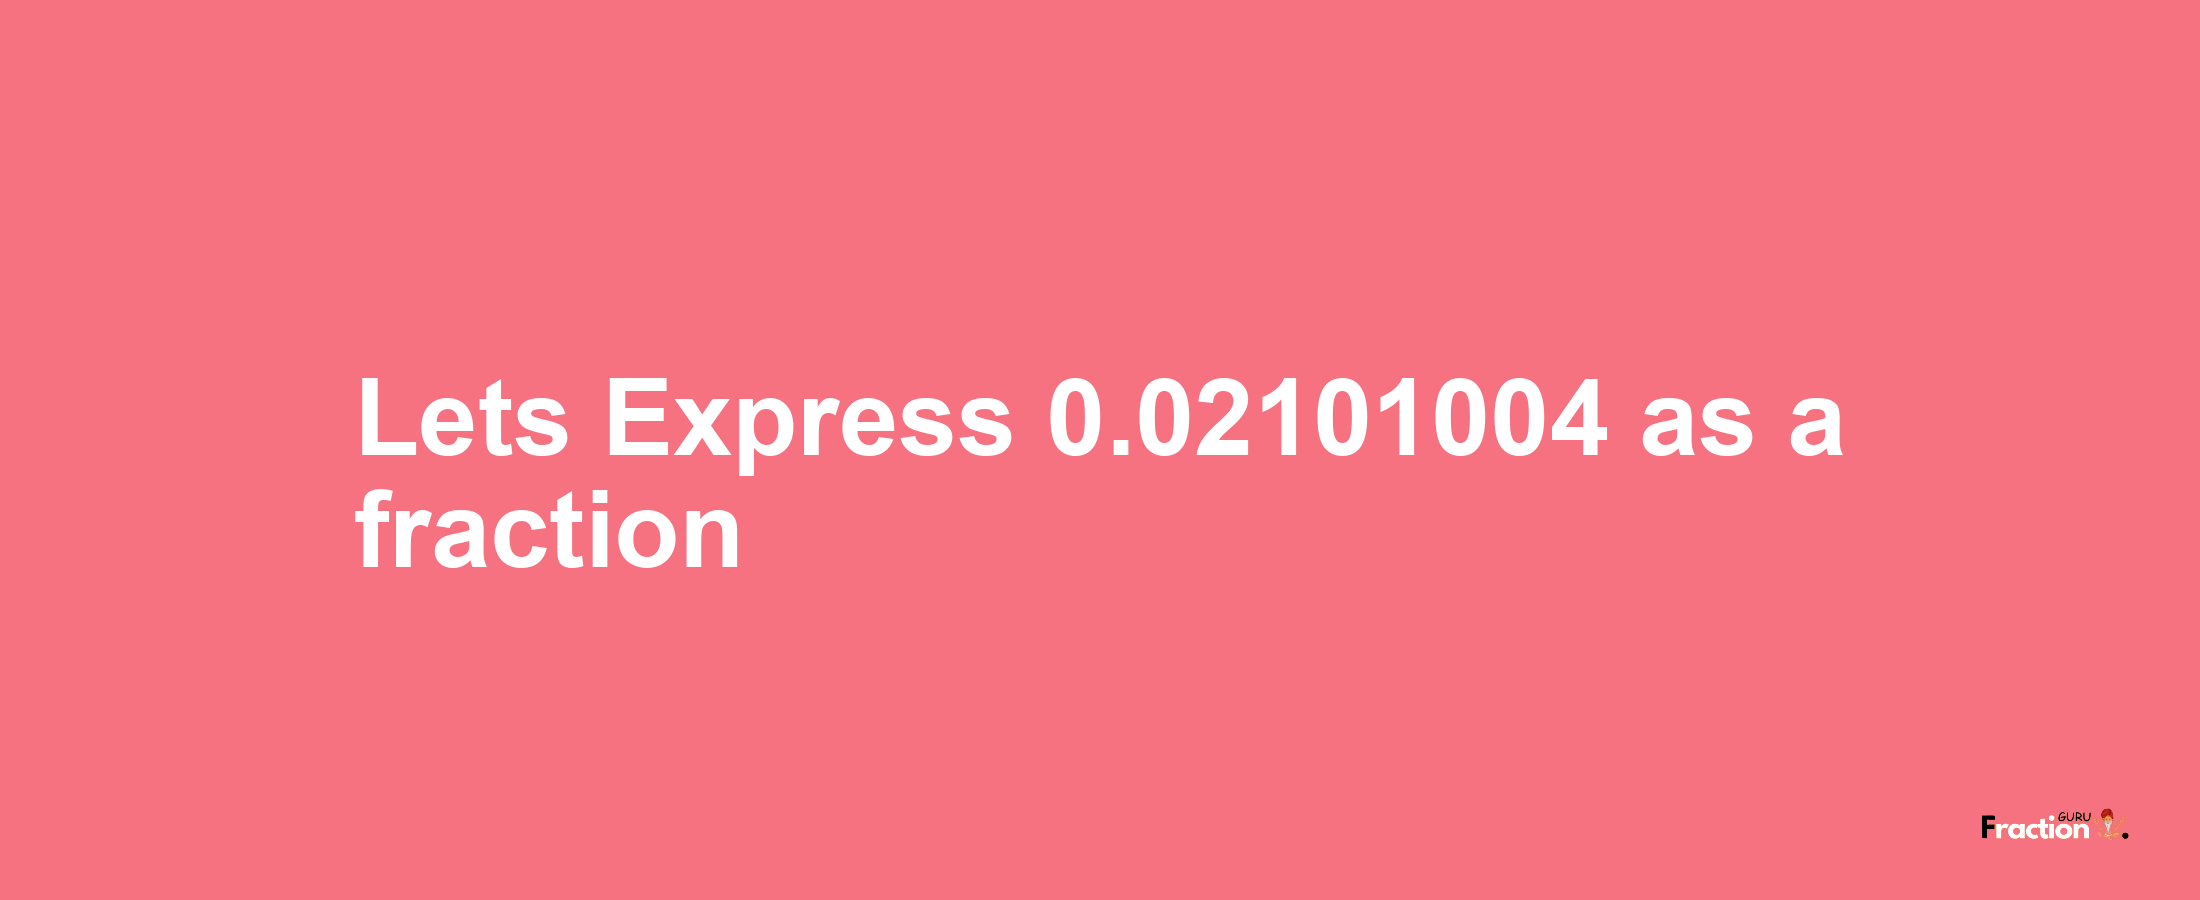 Lets Express 0.02101004 as afraction